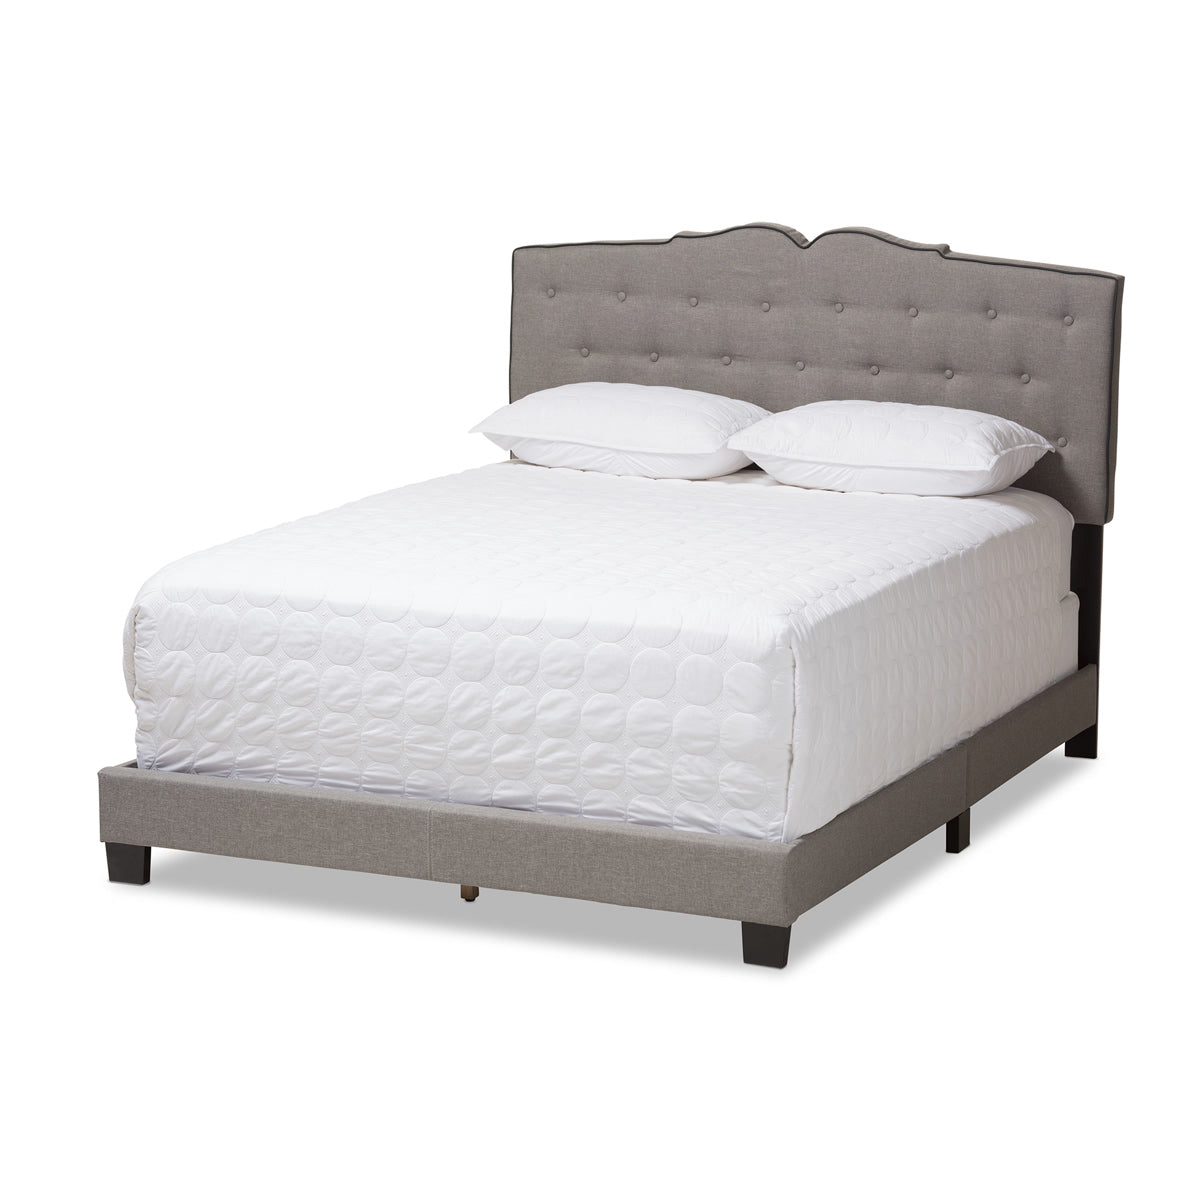 Baxton Studio Vivienne Modern and Contemporary Light Grey Fabric Upholstered King Size Bed Baxton Studio-0-Minimal And Modern - 1